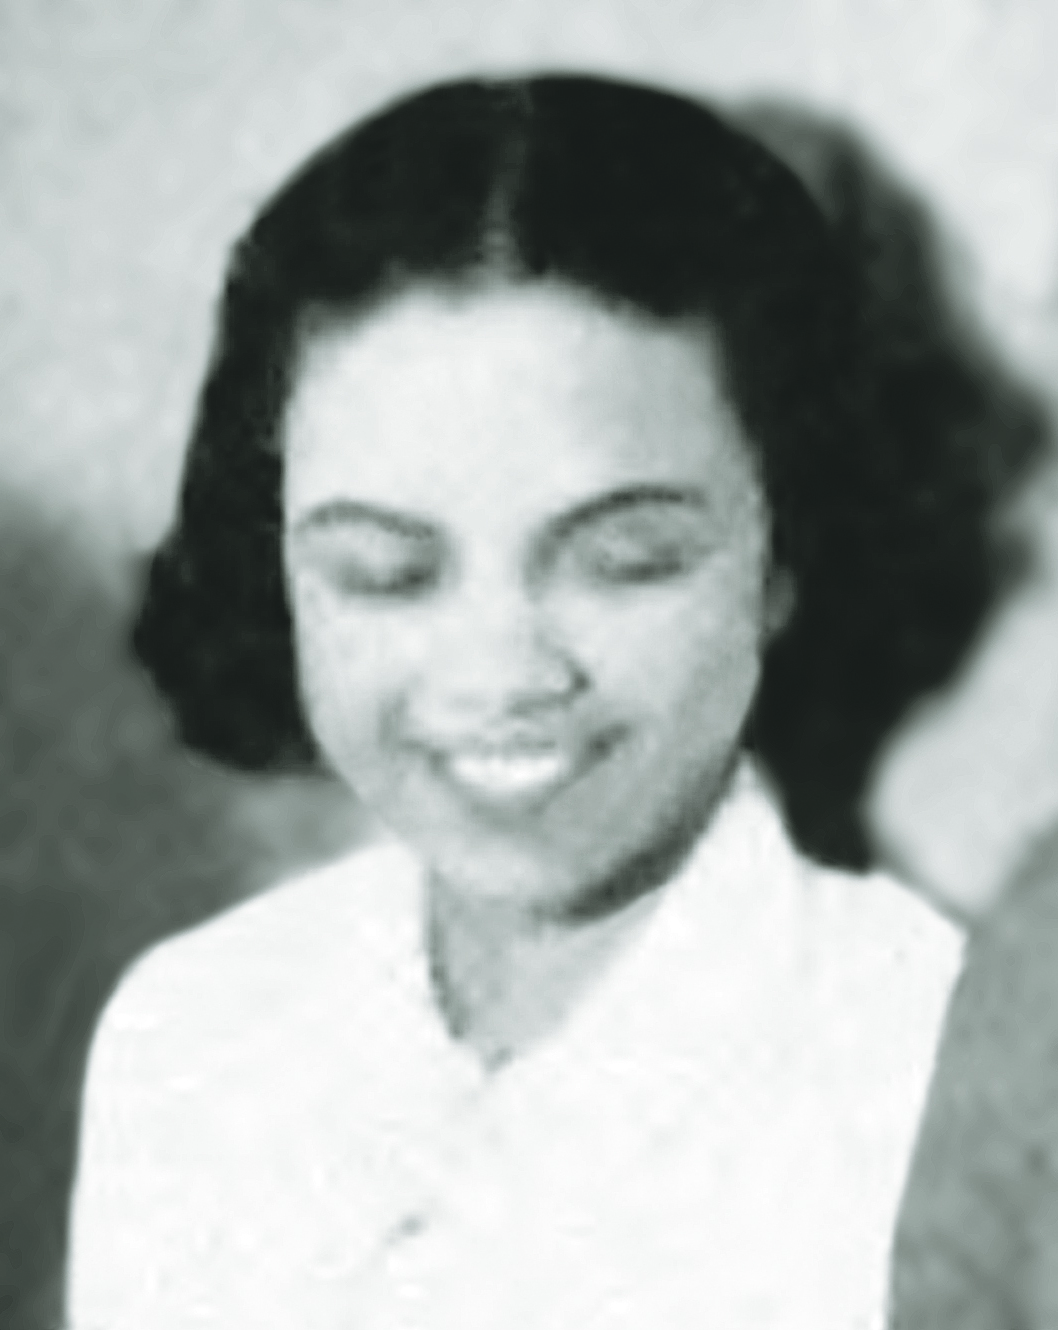 Charlotte Crump Didn’t “verify [her] facts. Problem.”
A founder of the Negro Student Club, an early African-American yearbook staffer and author of a controversial article about racism, Crump saw her writing derided. She became a journalist, worked for the NAACP and founded a national advocacy organization.